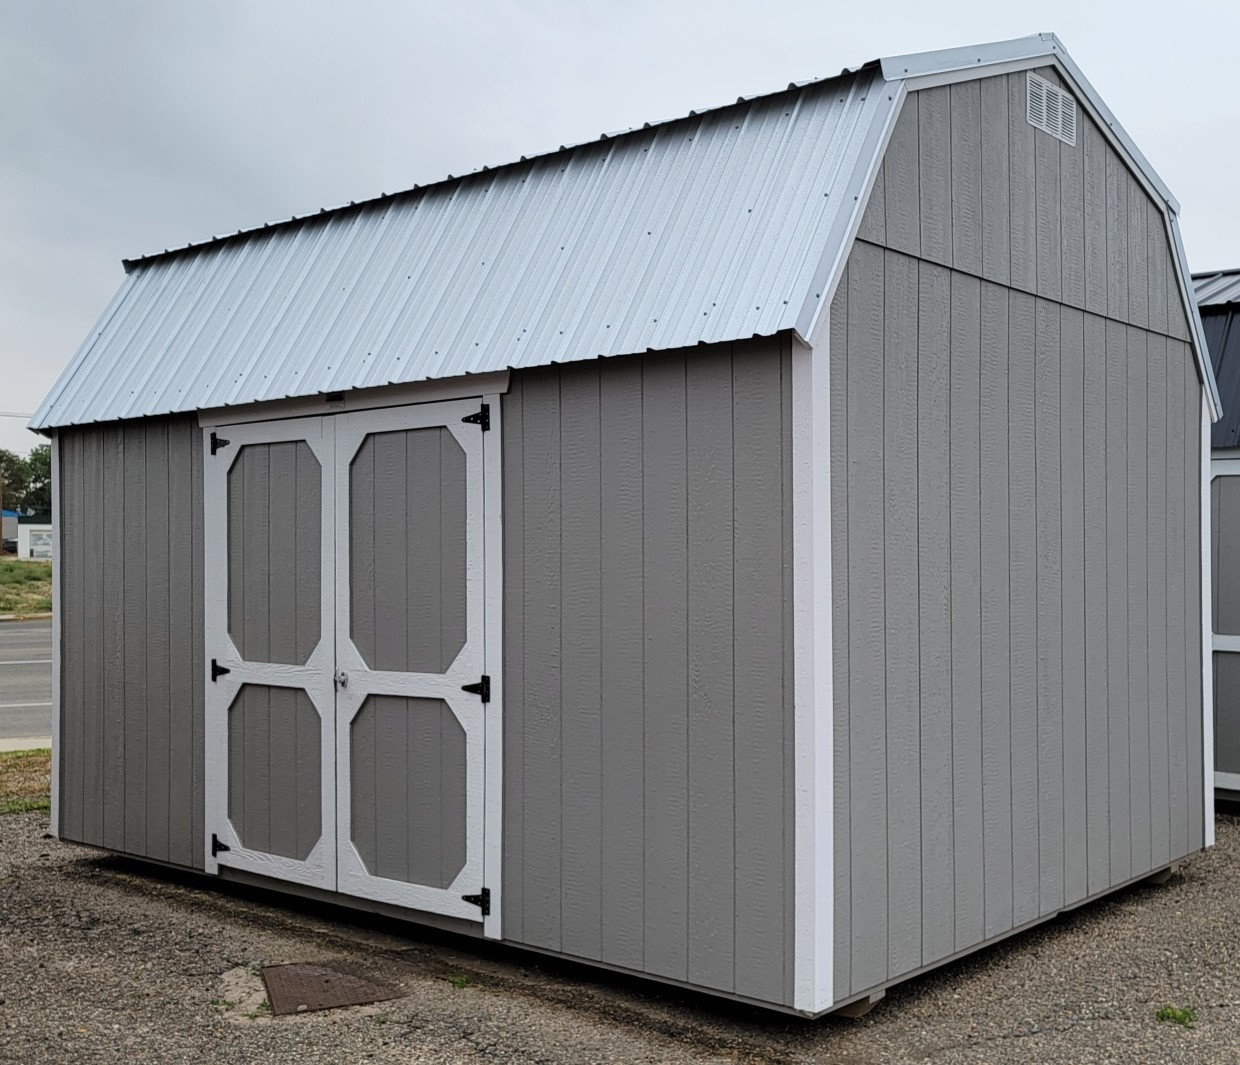 Buy Now: 10x16 Painted Lofted Barn Shed | Sheds For Sale or Custom order Sheds at French Creek Designs Shed Sales, Casper Wy